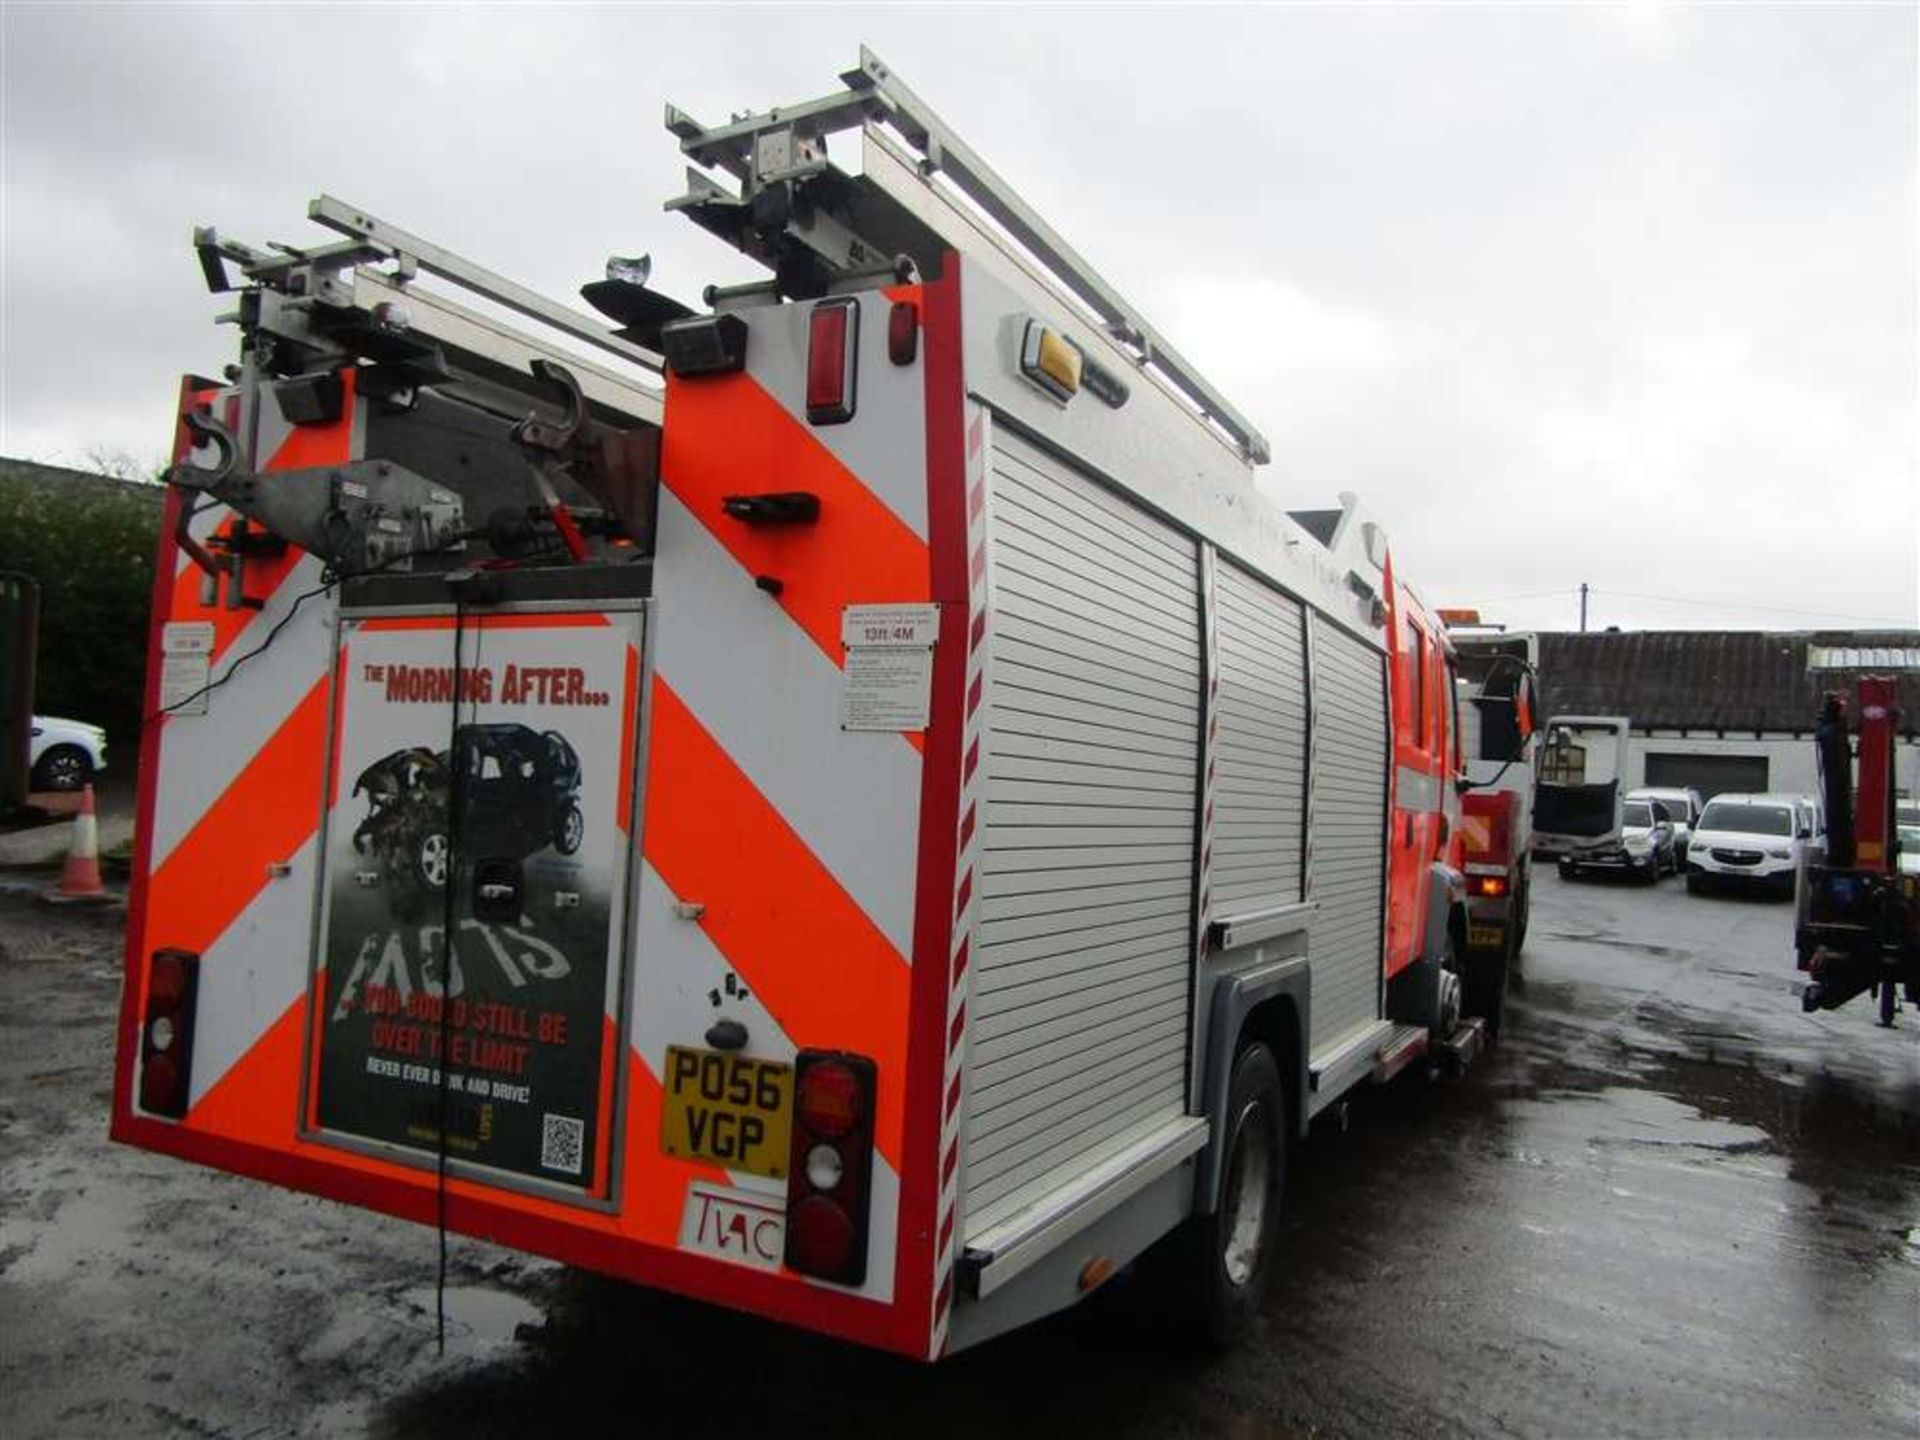 2006 56 reg DAF FA LF55.250 Fire Engine (Non Runner) (Direct Lancs Fire & Rescue) - Image 4 of 5